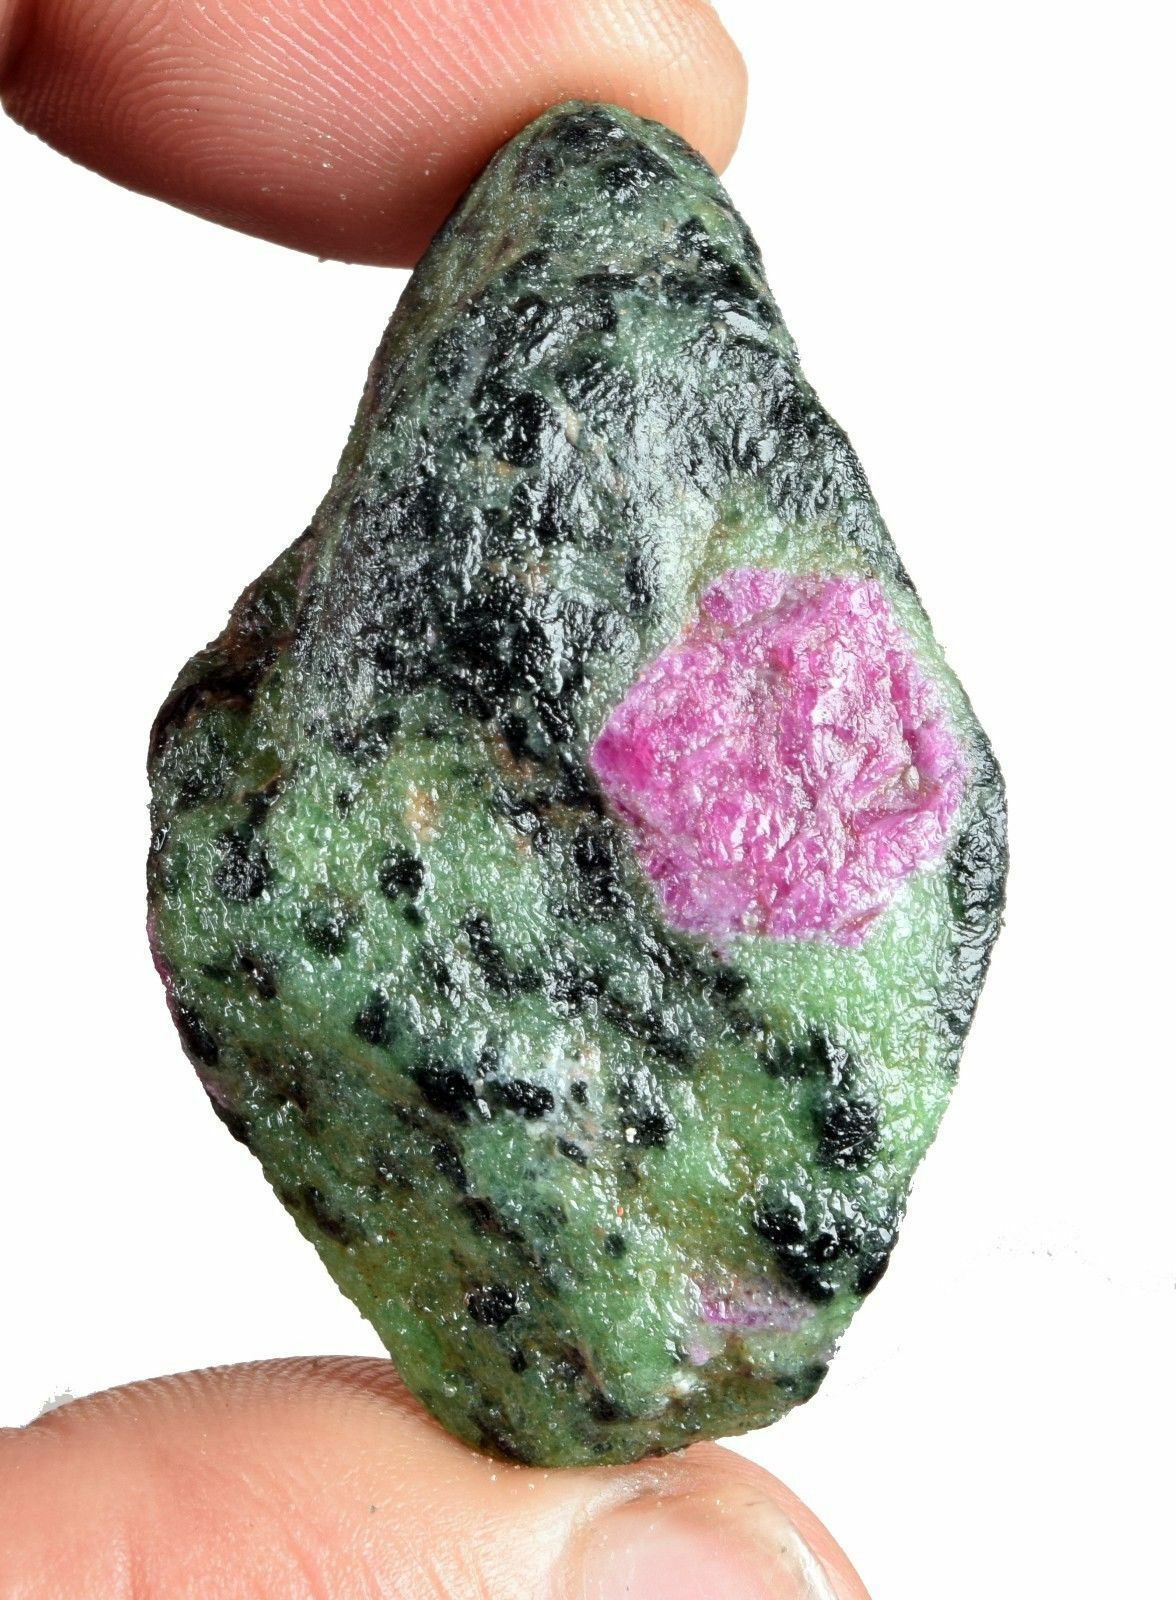 Certified 100% Natural Untreated 217.00 Cts. Ruby Zoisite Bicolor Rough Gemstone